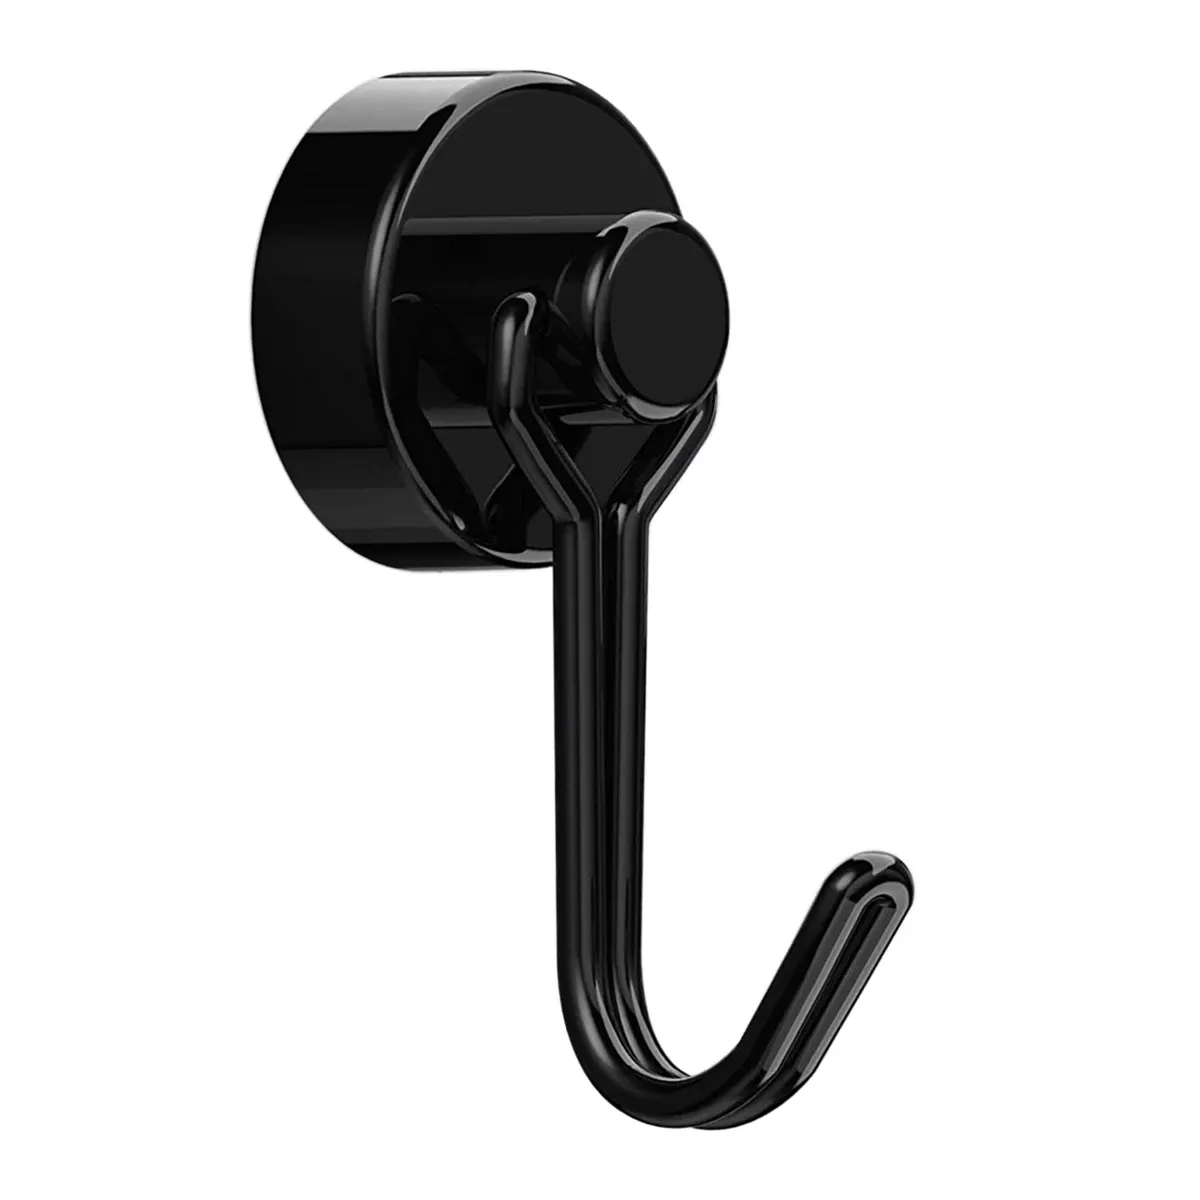 Heavy Duty Magnetic Hook, Strong Neodymium Magnets Hooks for Home, Refrigerator, Grill, Kitchen, Multi-Purpose Black Key Holder